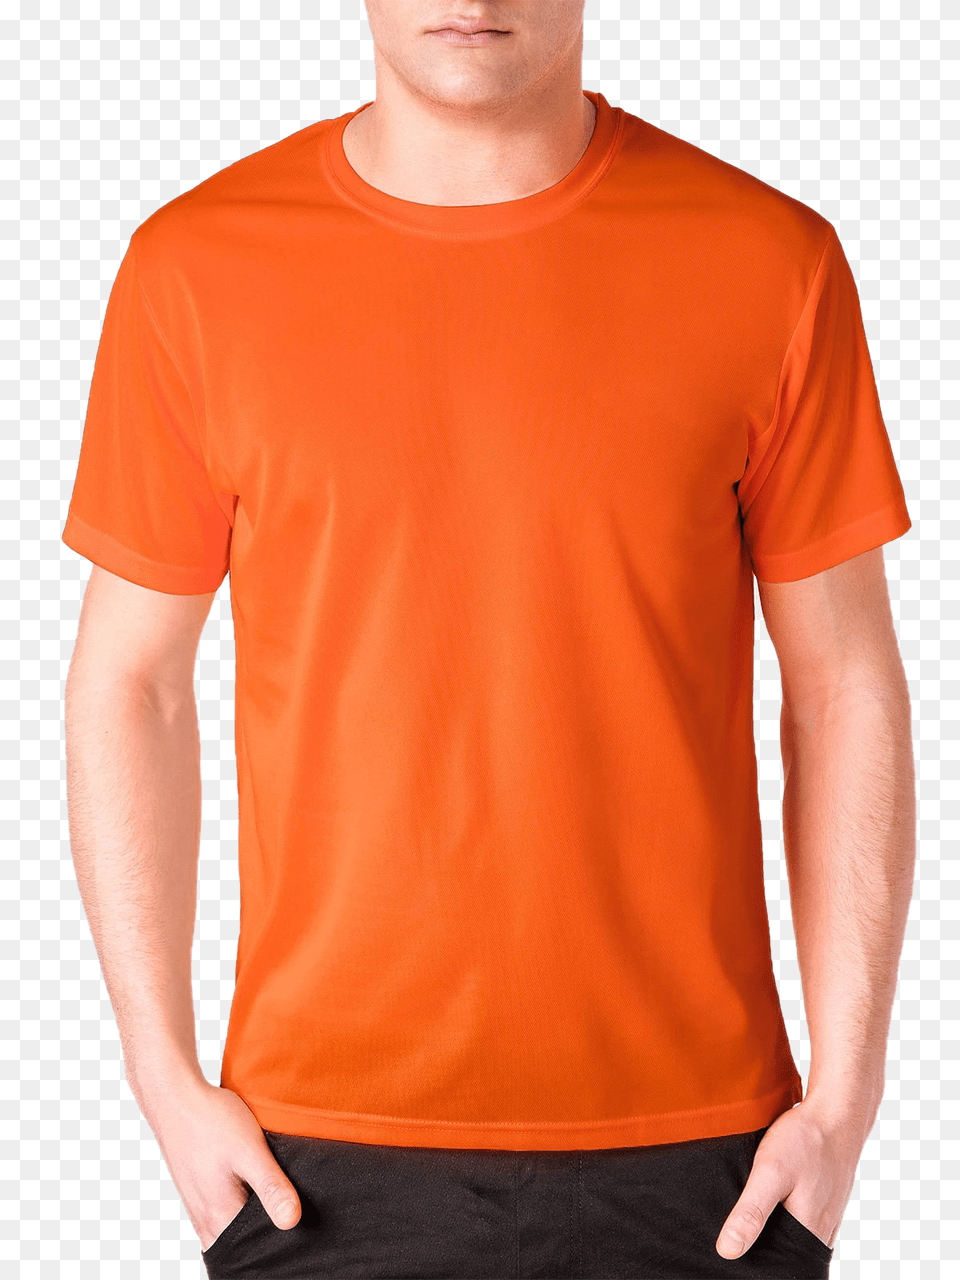 Shirt And Vectors For Free Download Orange T Shirt, Clothing, T-shirt, Sleeve Png Image